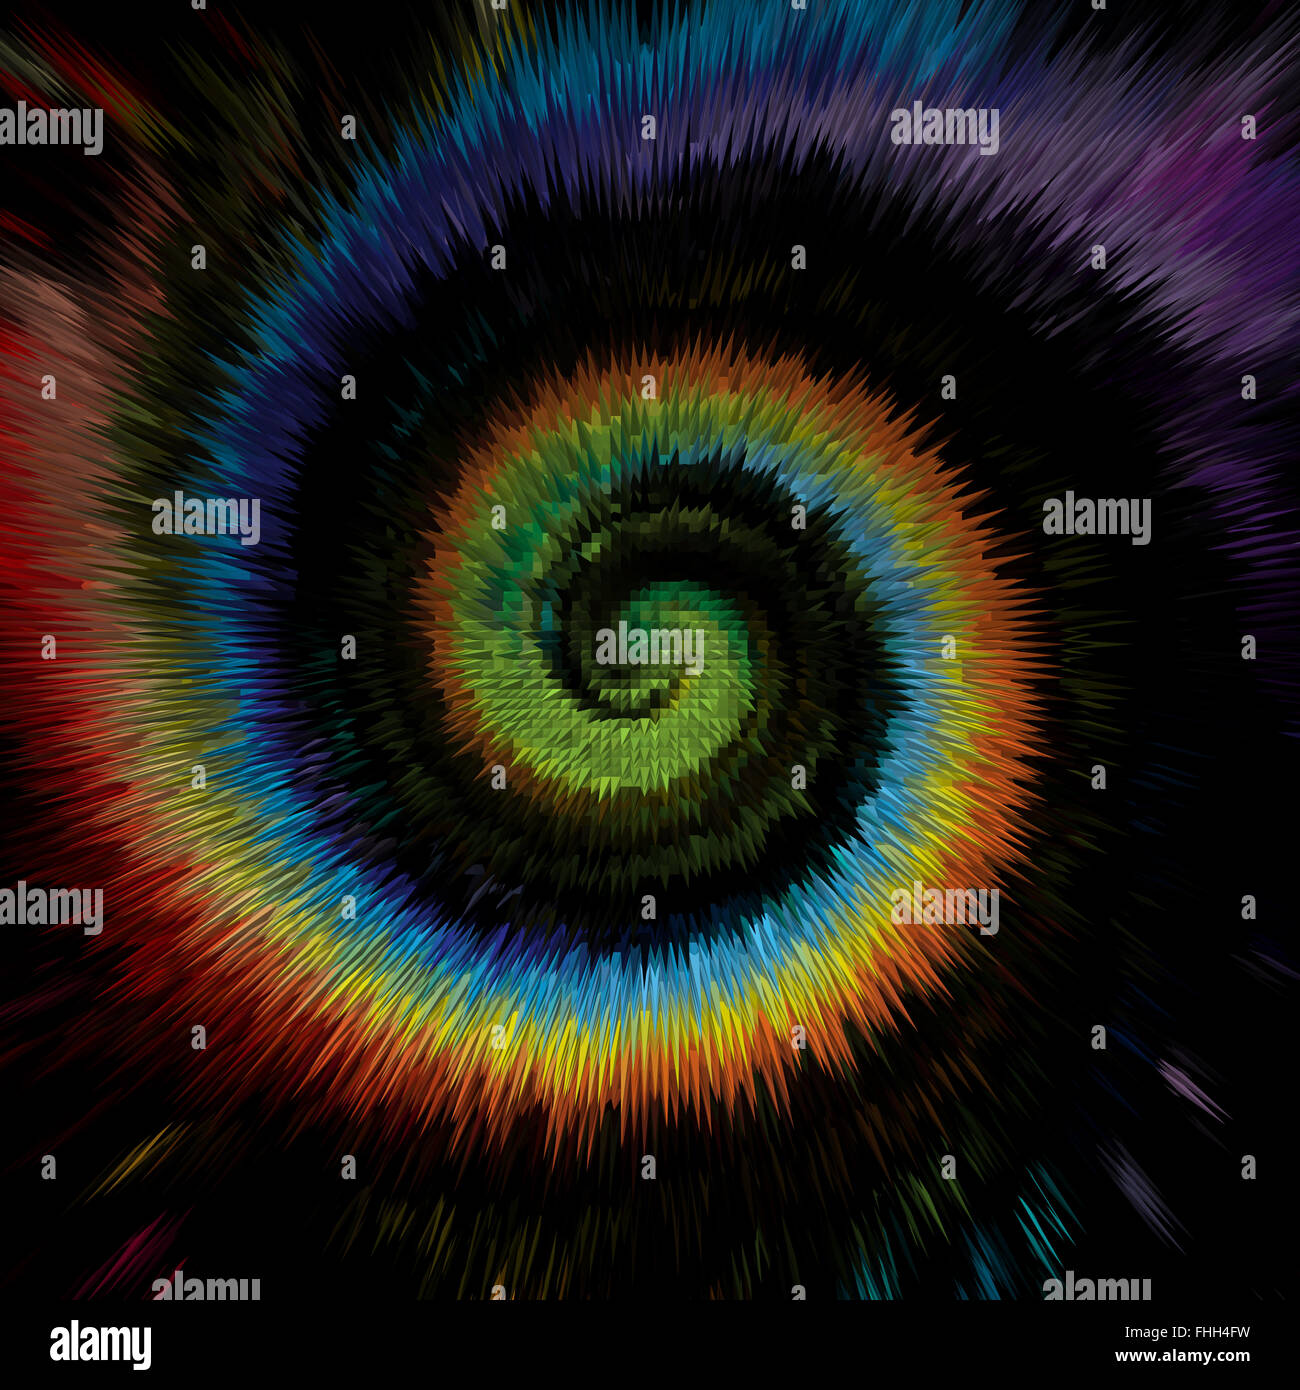 Abstract dark background of swirl colors Stock Photo